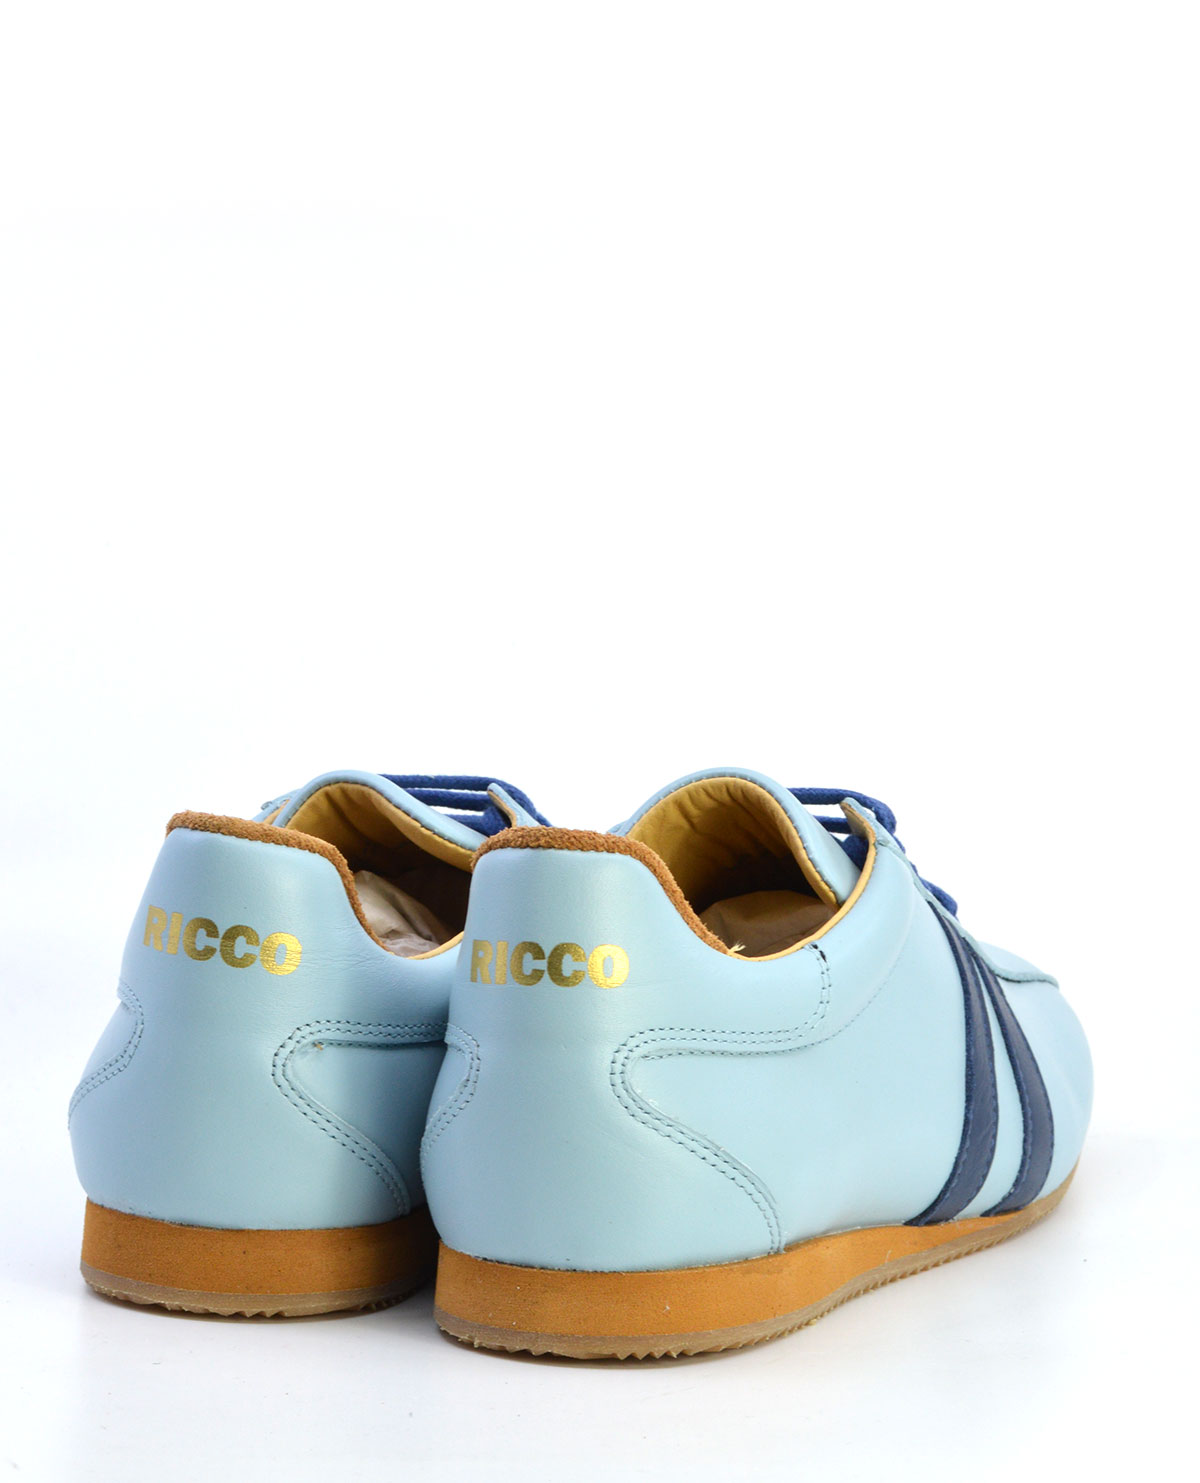 The Ricco in Blue Leather & White Stripe - Old School Trainers